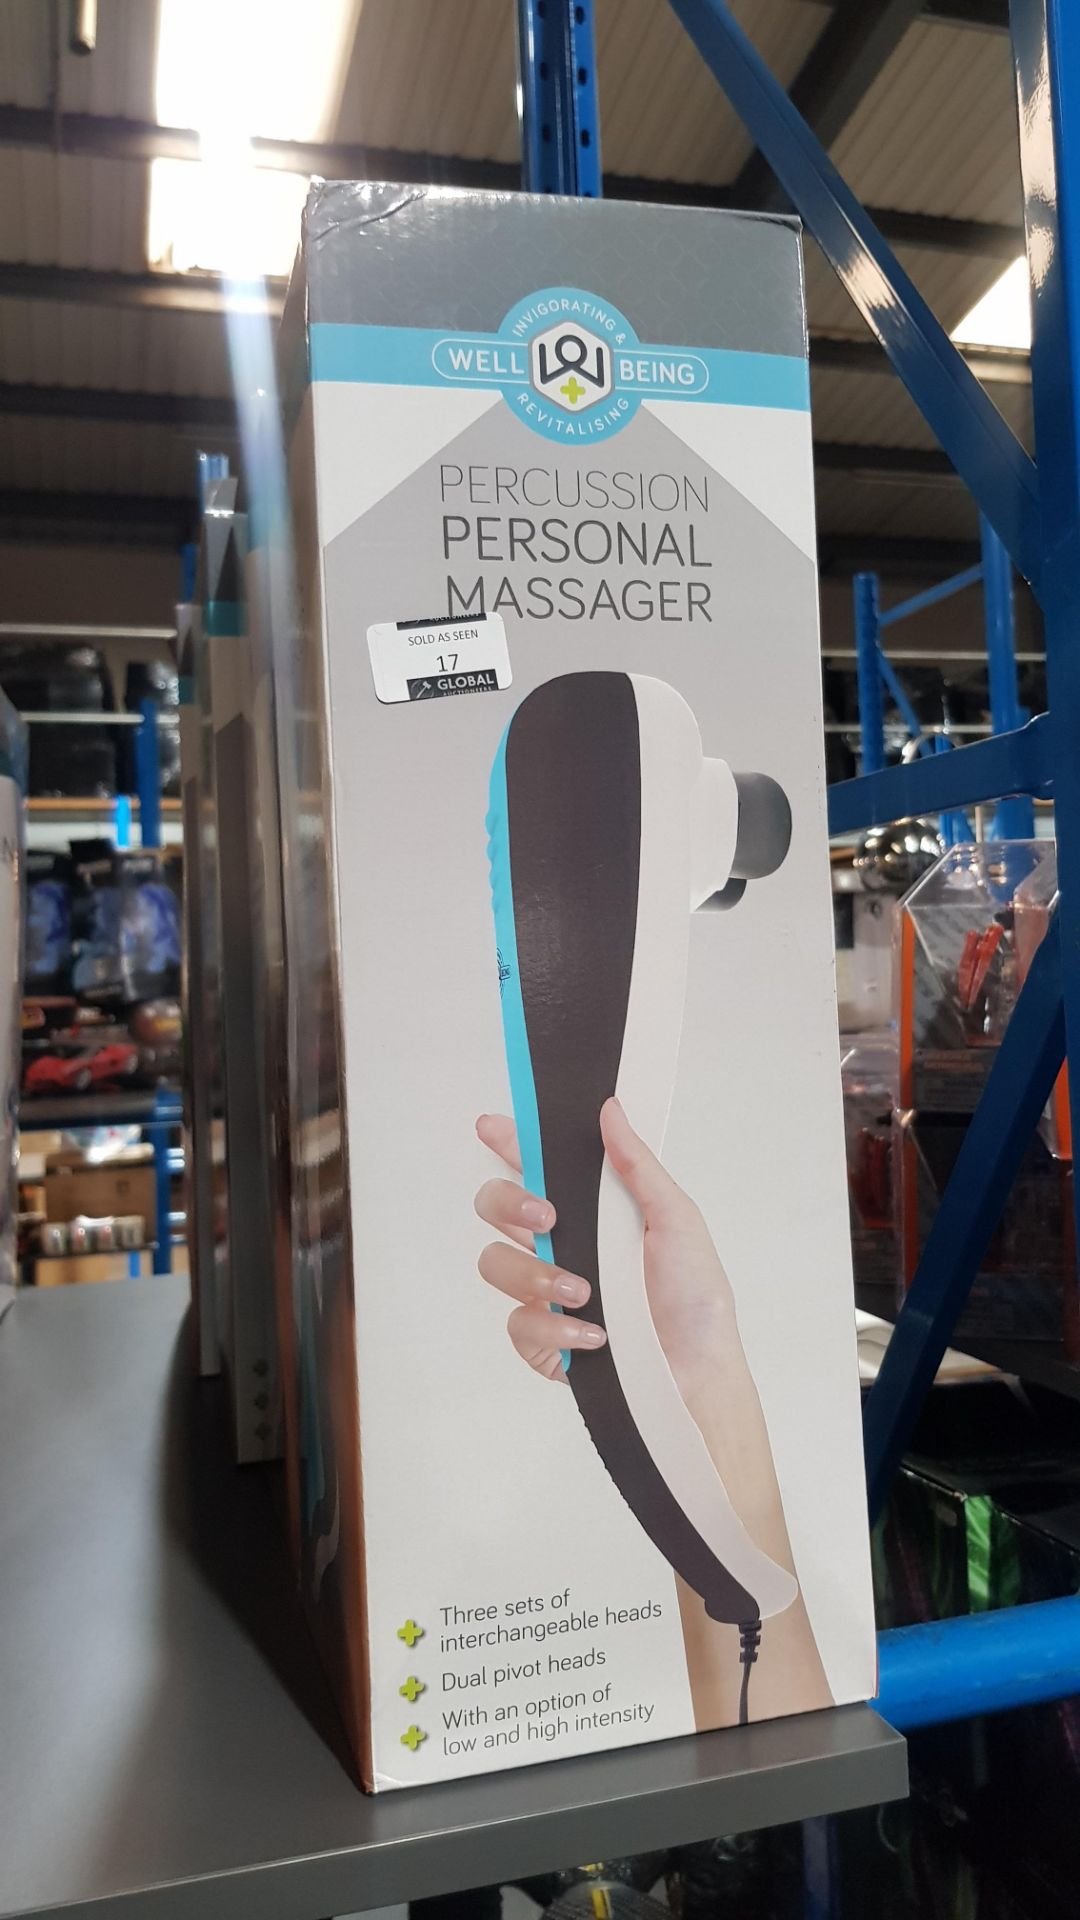 5 X WELL BEING PERCUSSION PERSONAL MASSAGER